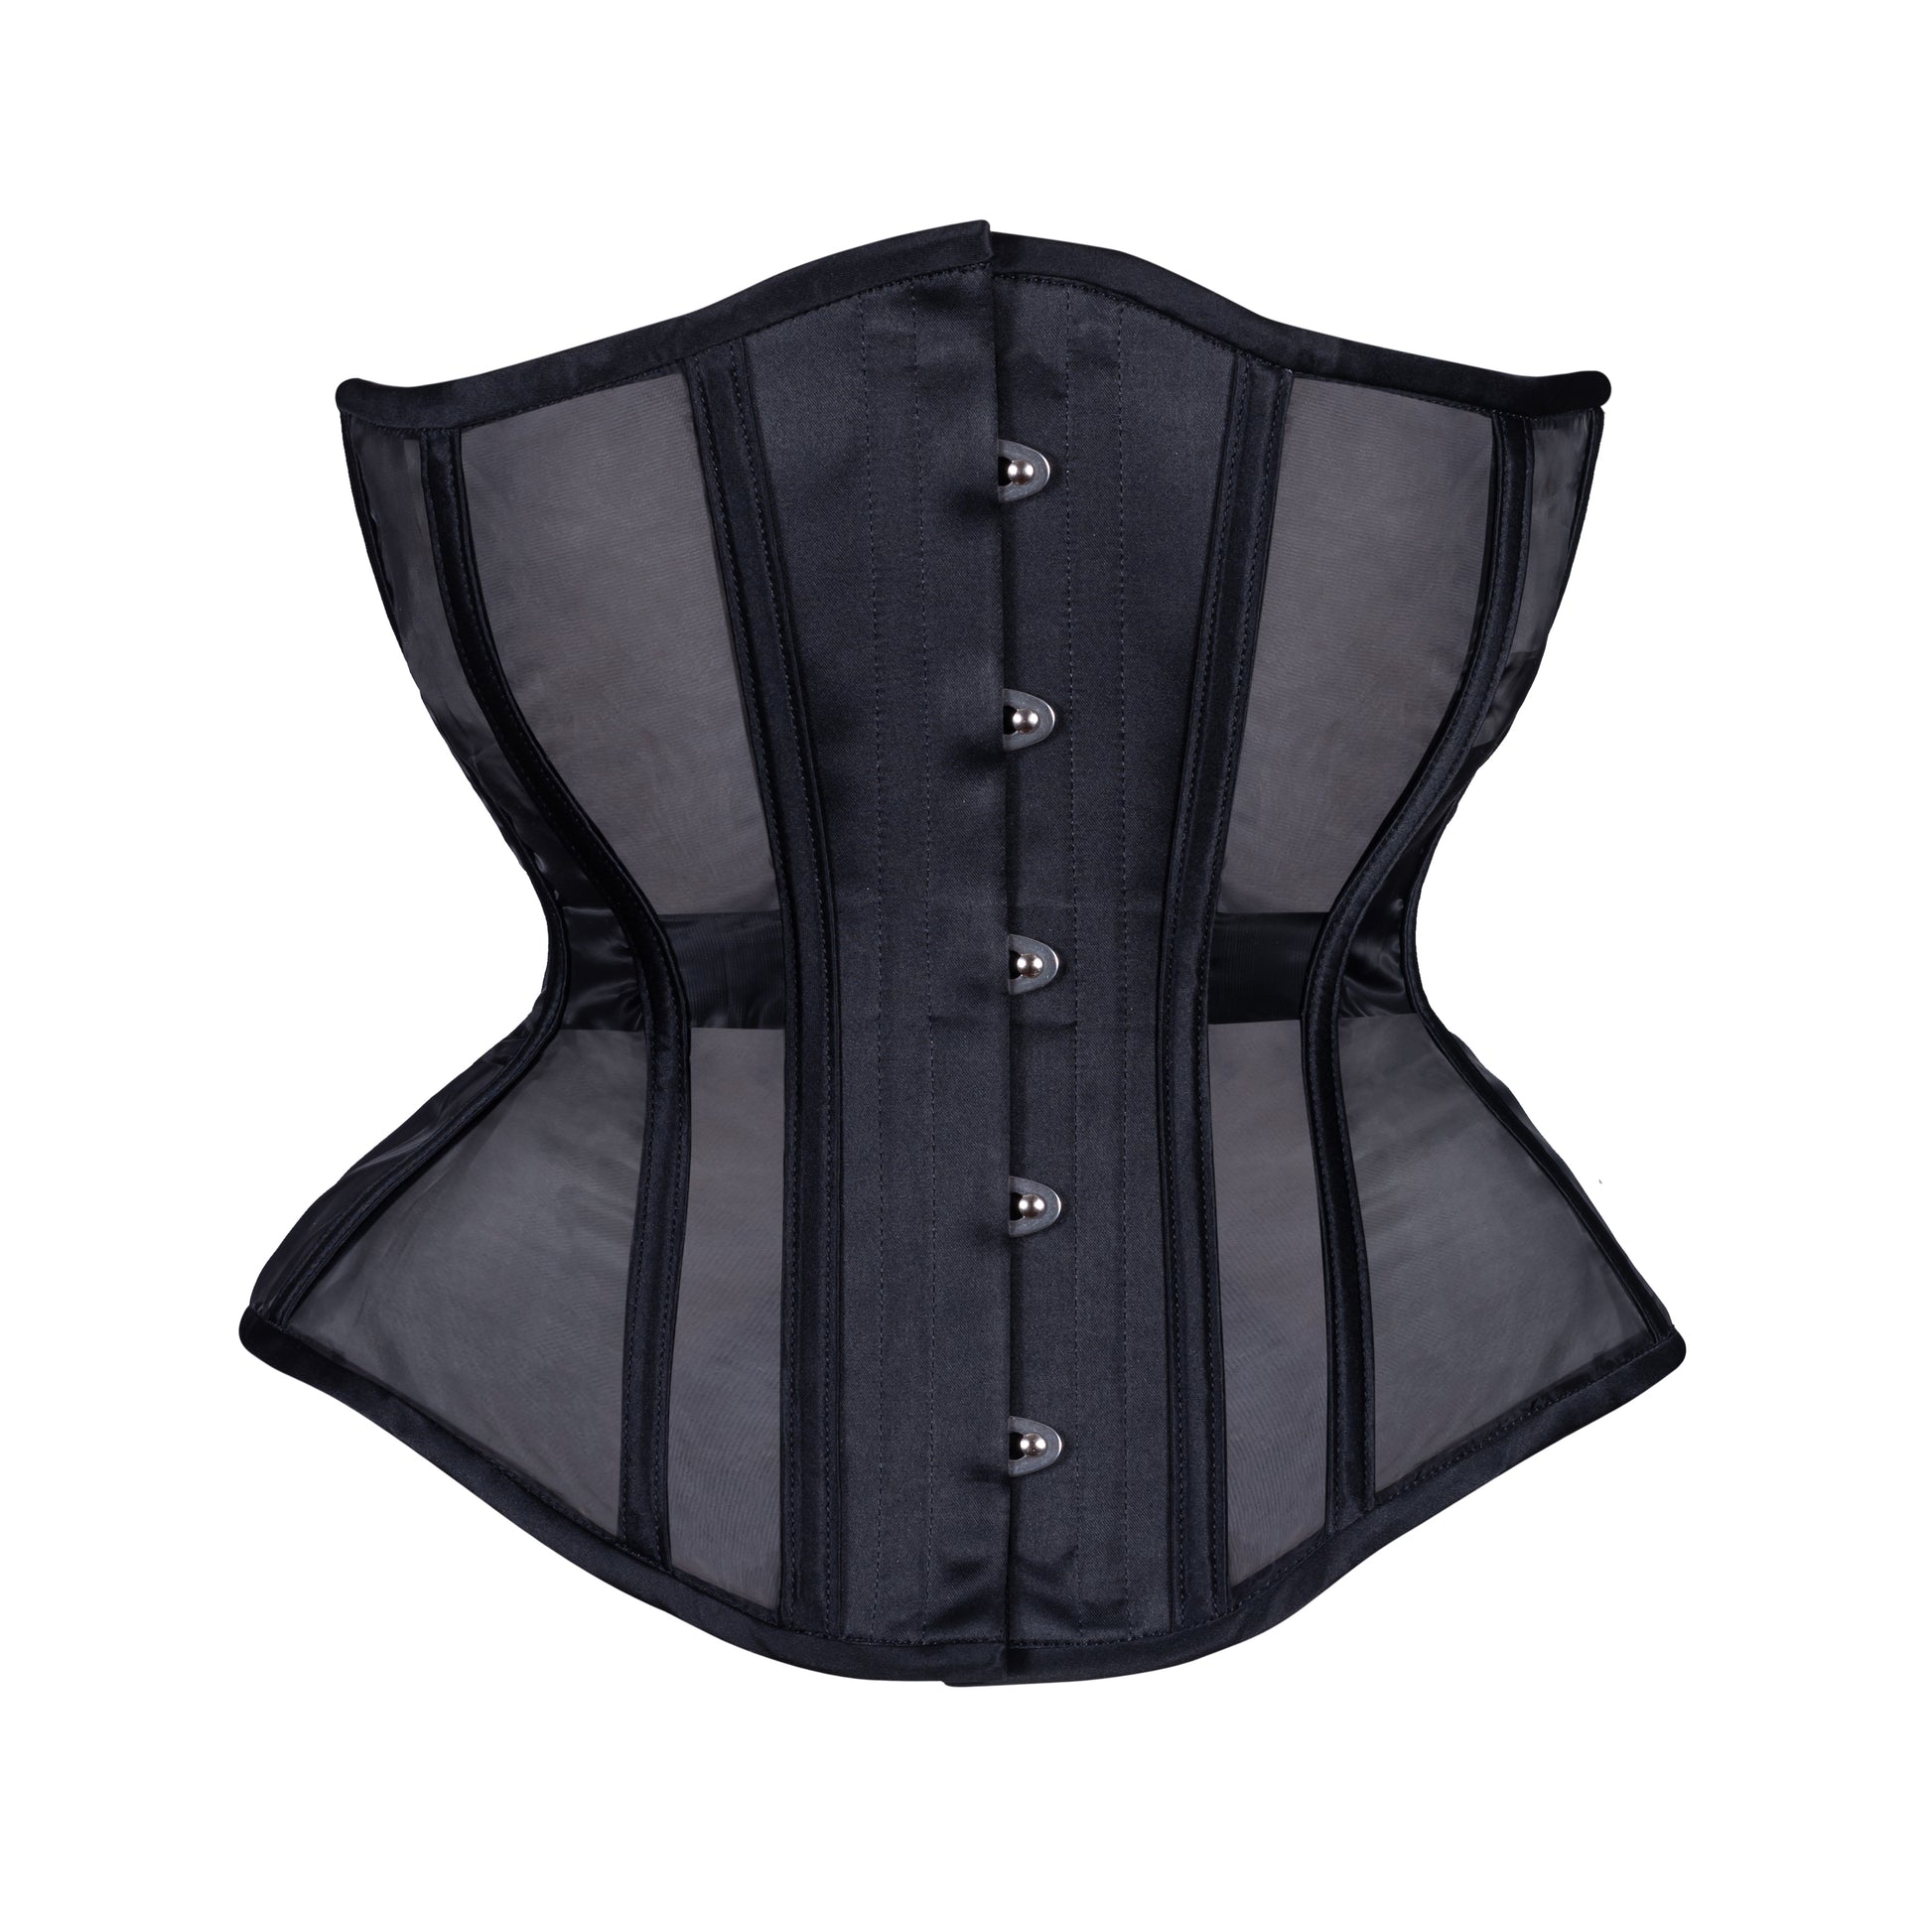 Is there an acceptable range for rib/hip springs? : r/corsetry